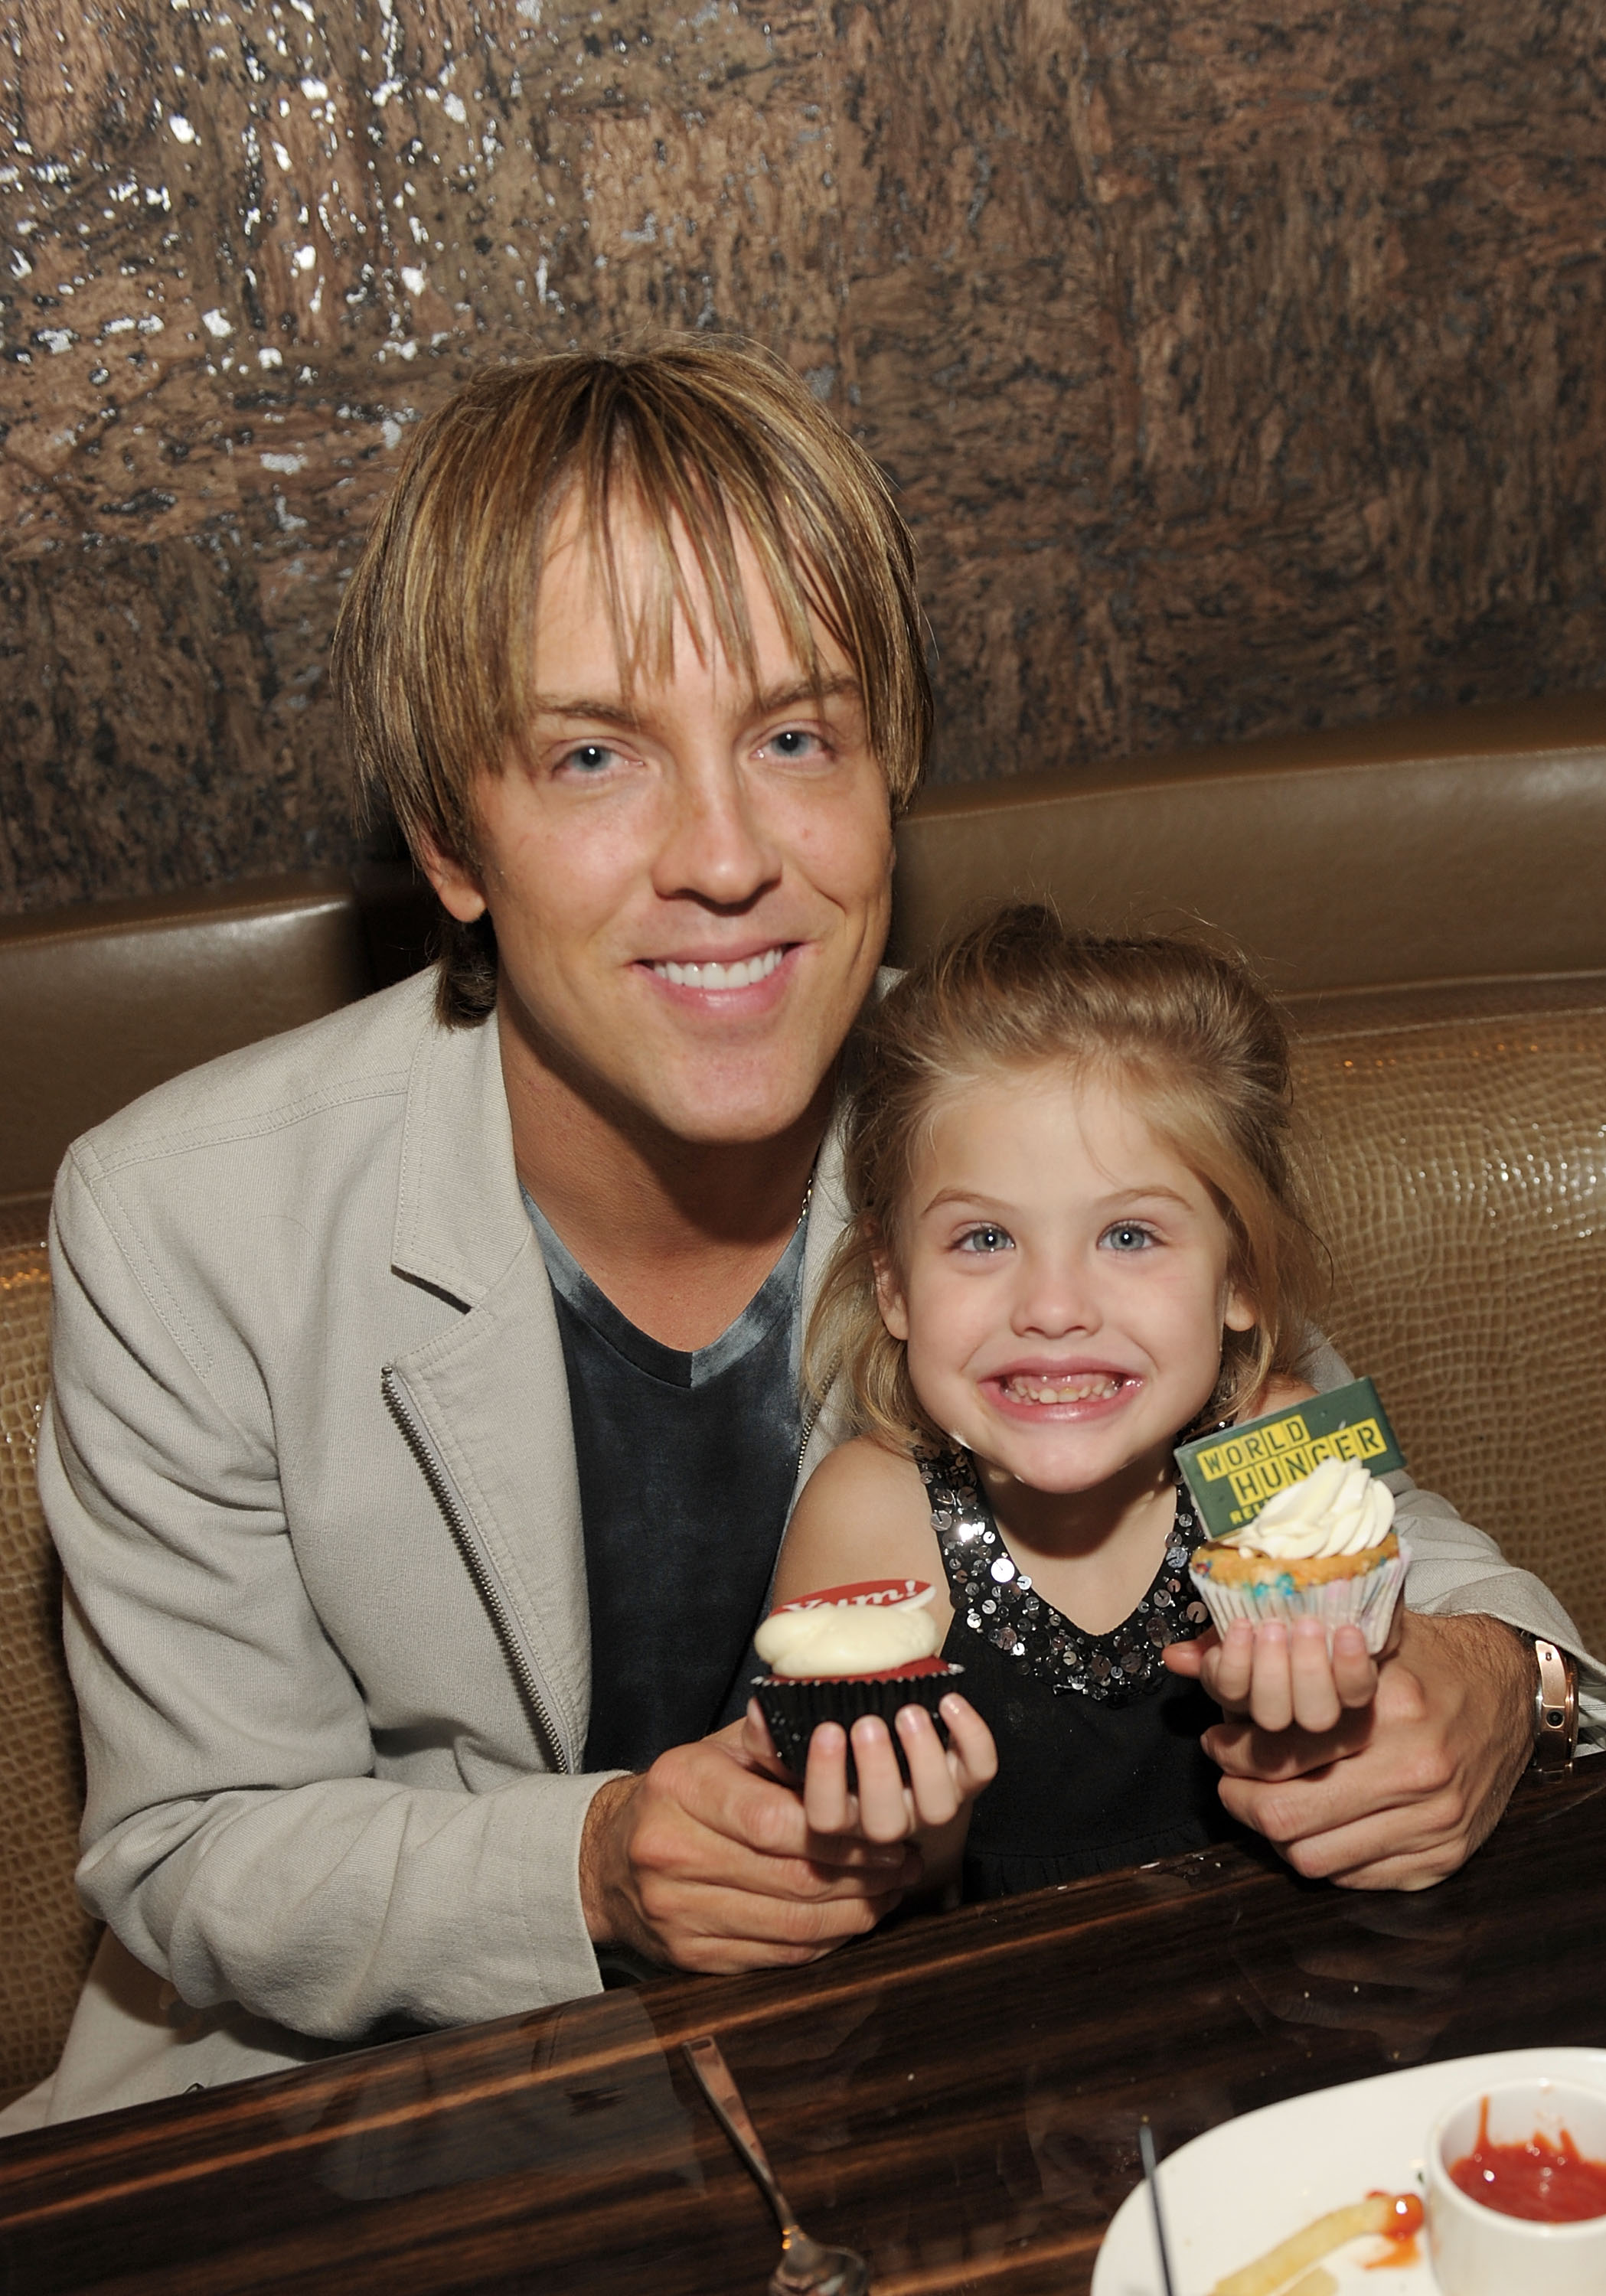 Larry Birkhead and daughter Dannielynn at City Center for the World Hunger Relief fundraiser on October 11, 2010 | Source: Getty Images